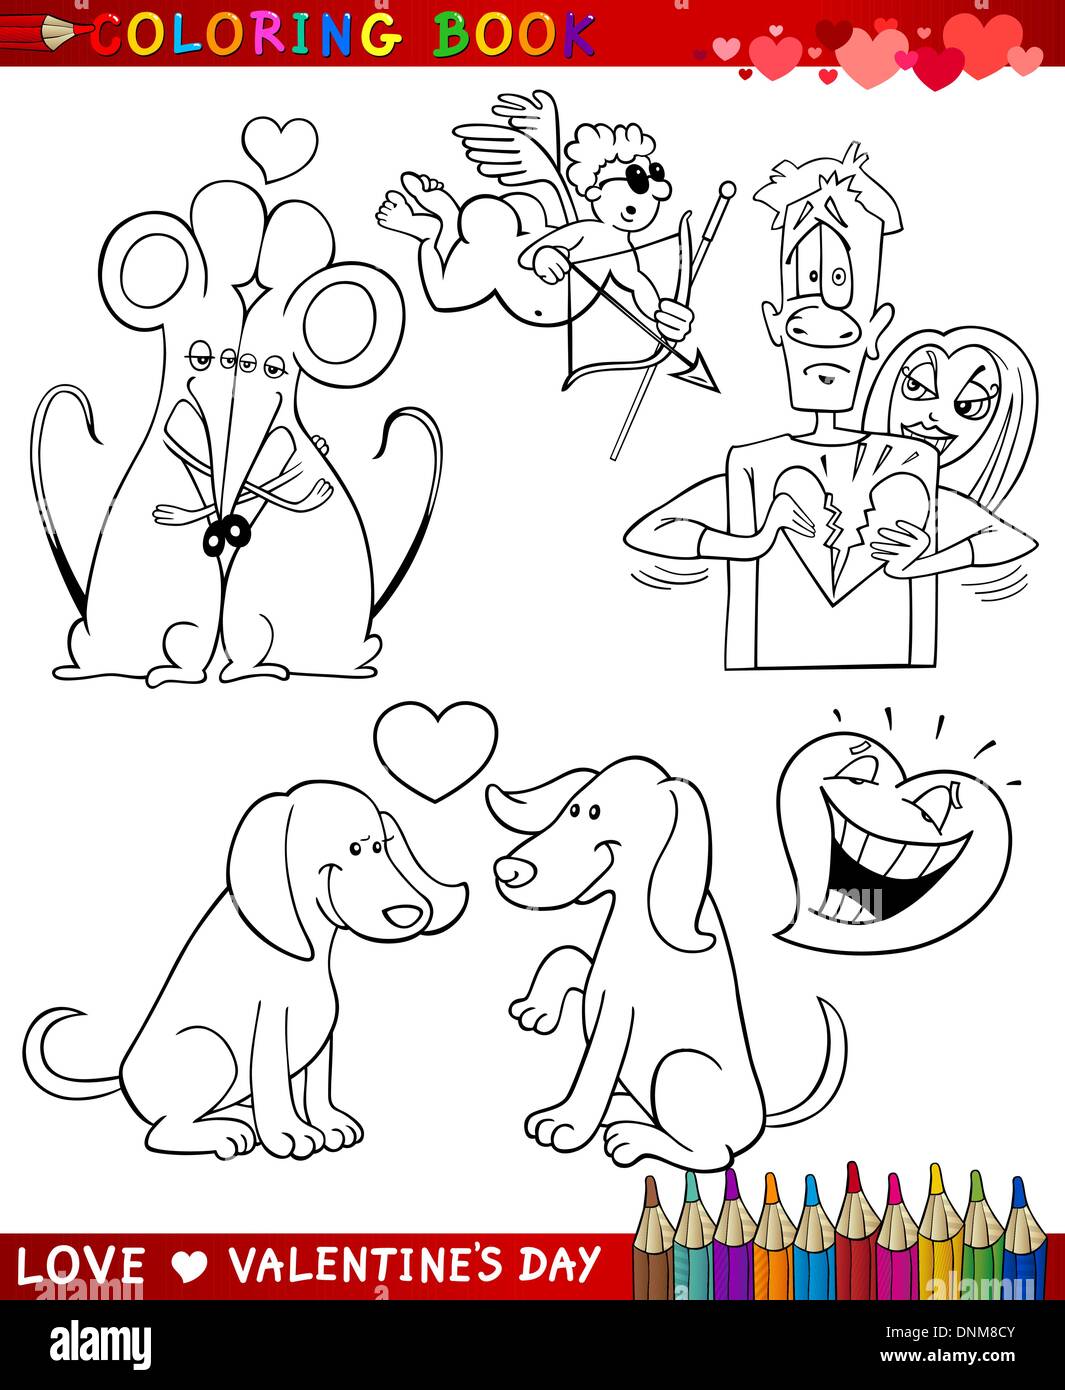 Valentines Day and Love Themes Collection Set of Black and White Cartoon Illustrations for Coloring Book Stock Vector